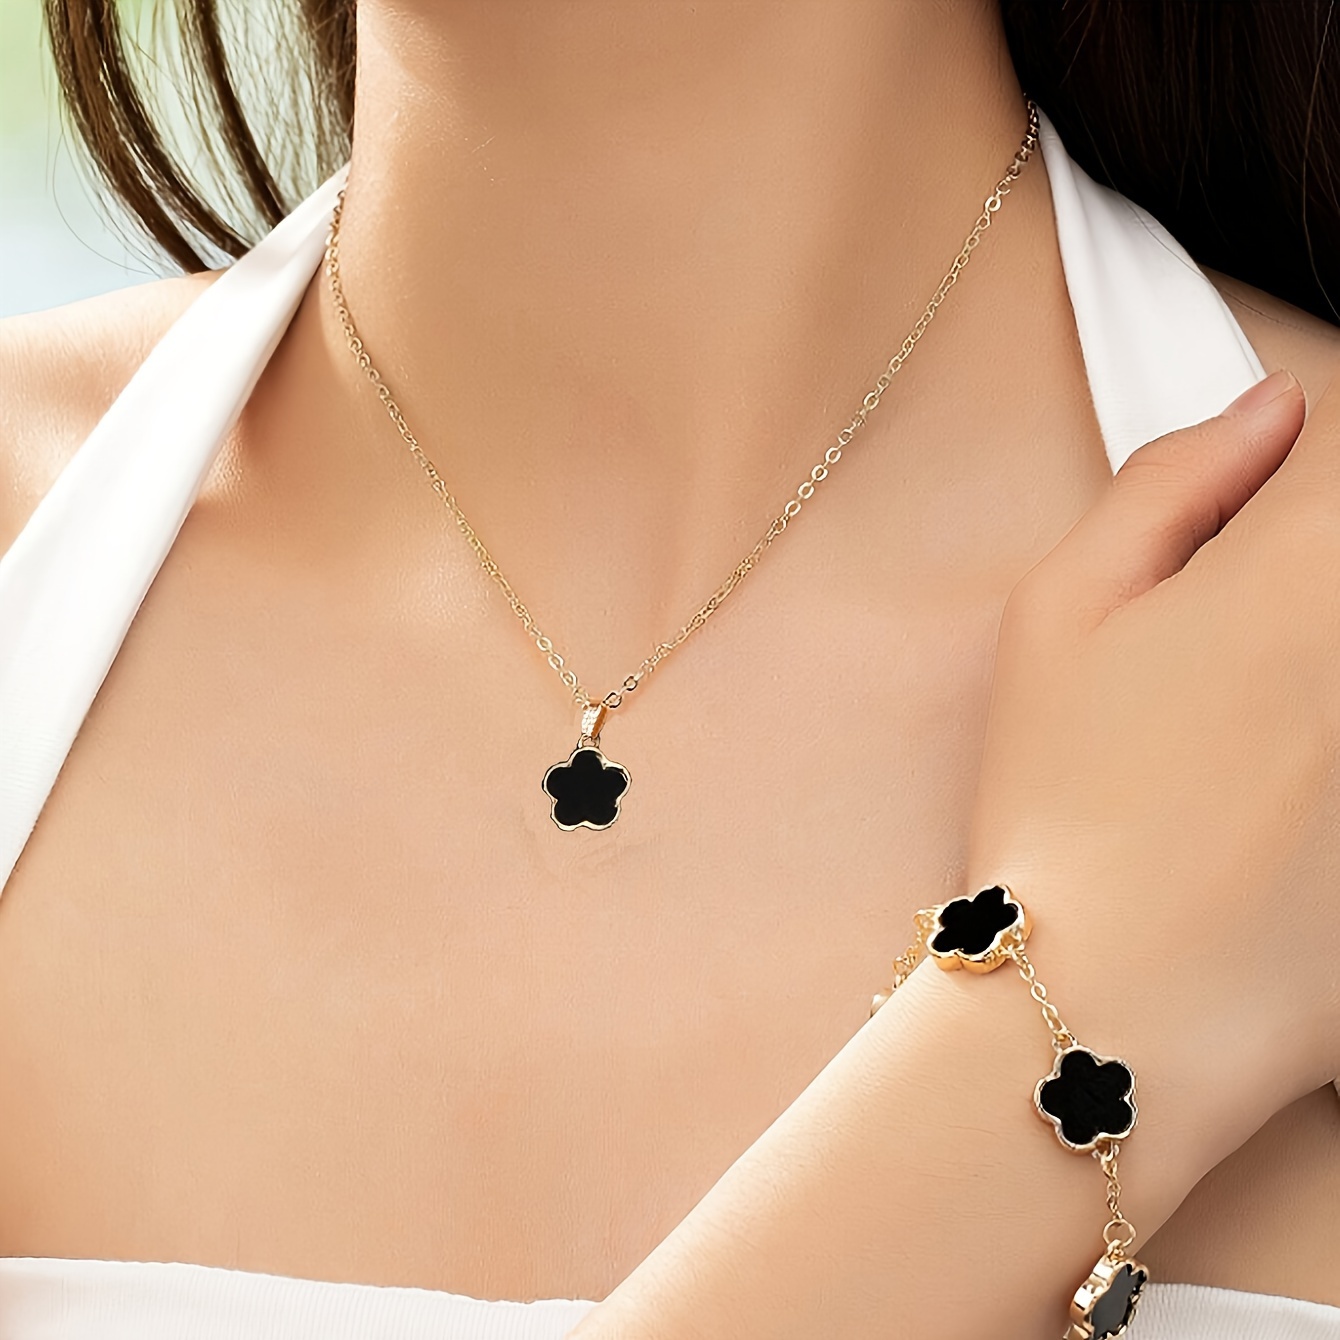 

Elegant Clover Pendant Necklace And Bracelet Jewelry Set, 1pc Each, Vintage Style, Vacation Look, High-end Quality, Golden Chain, Ideal For Gift And Personal Accessory